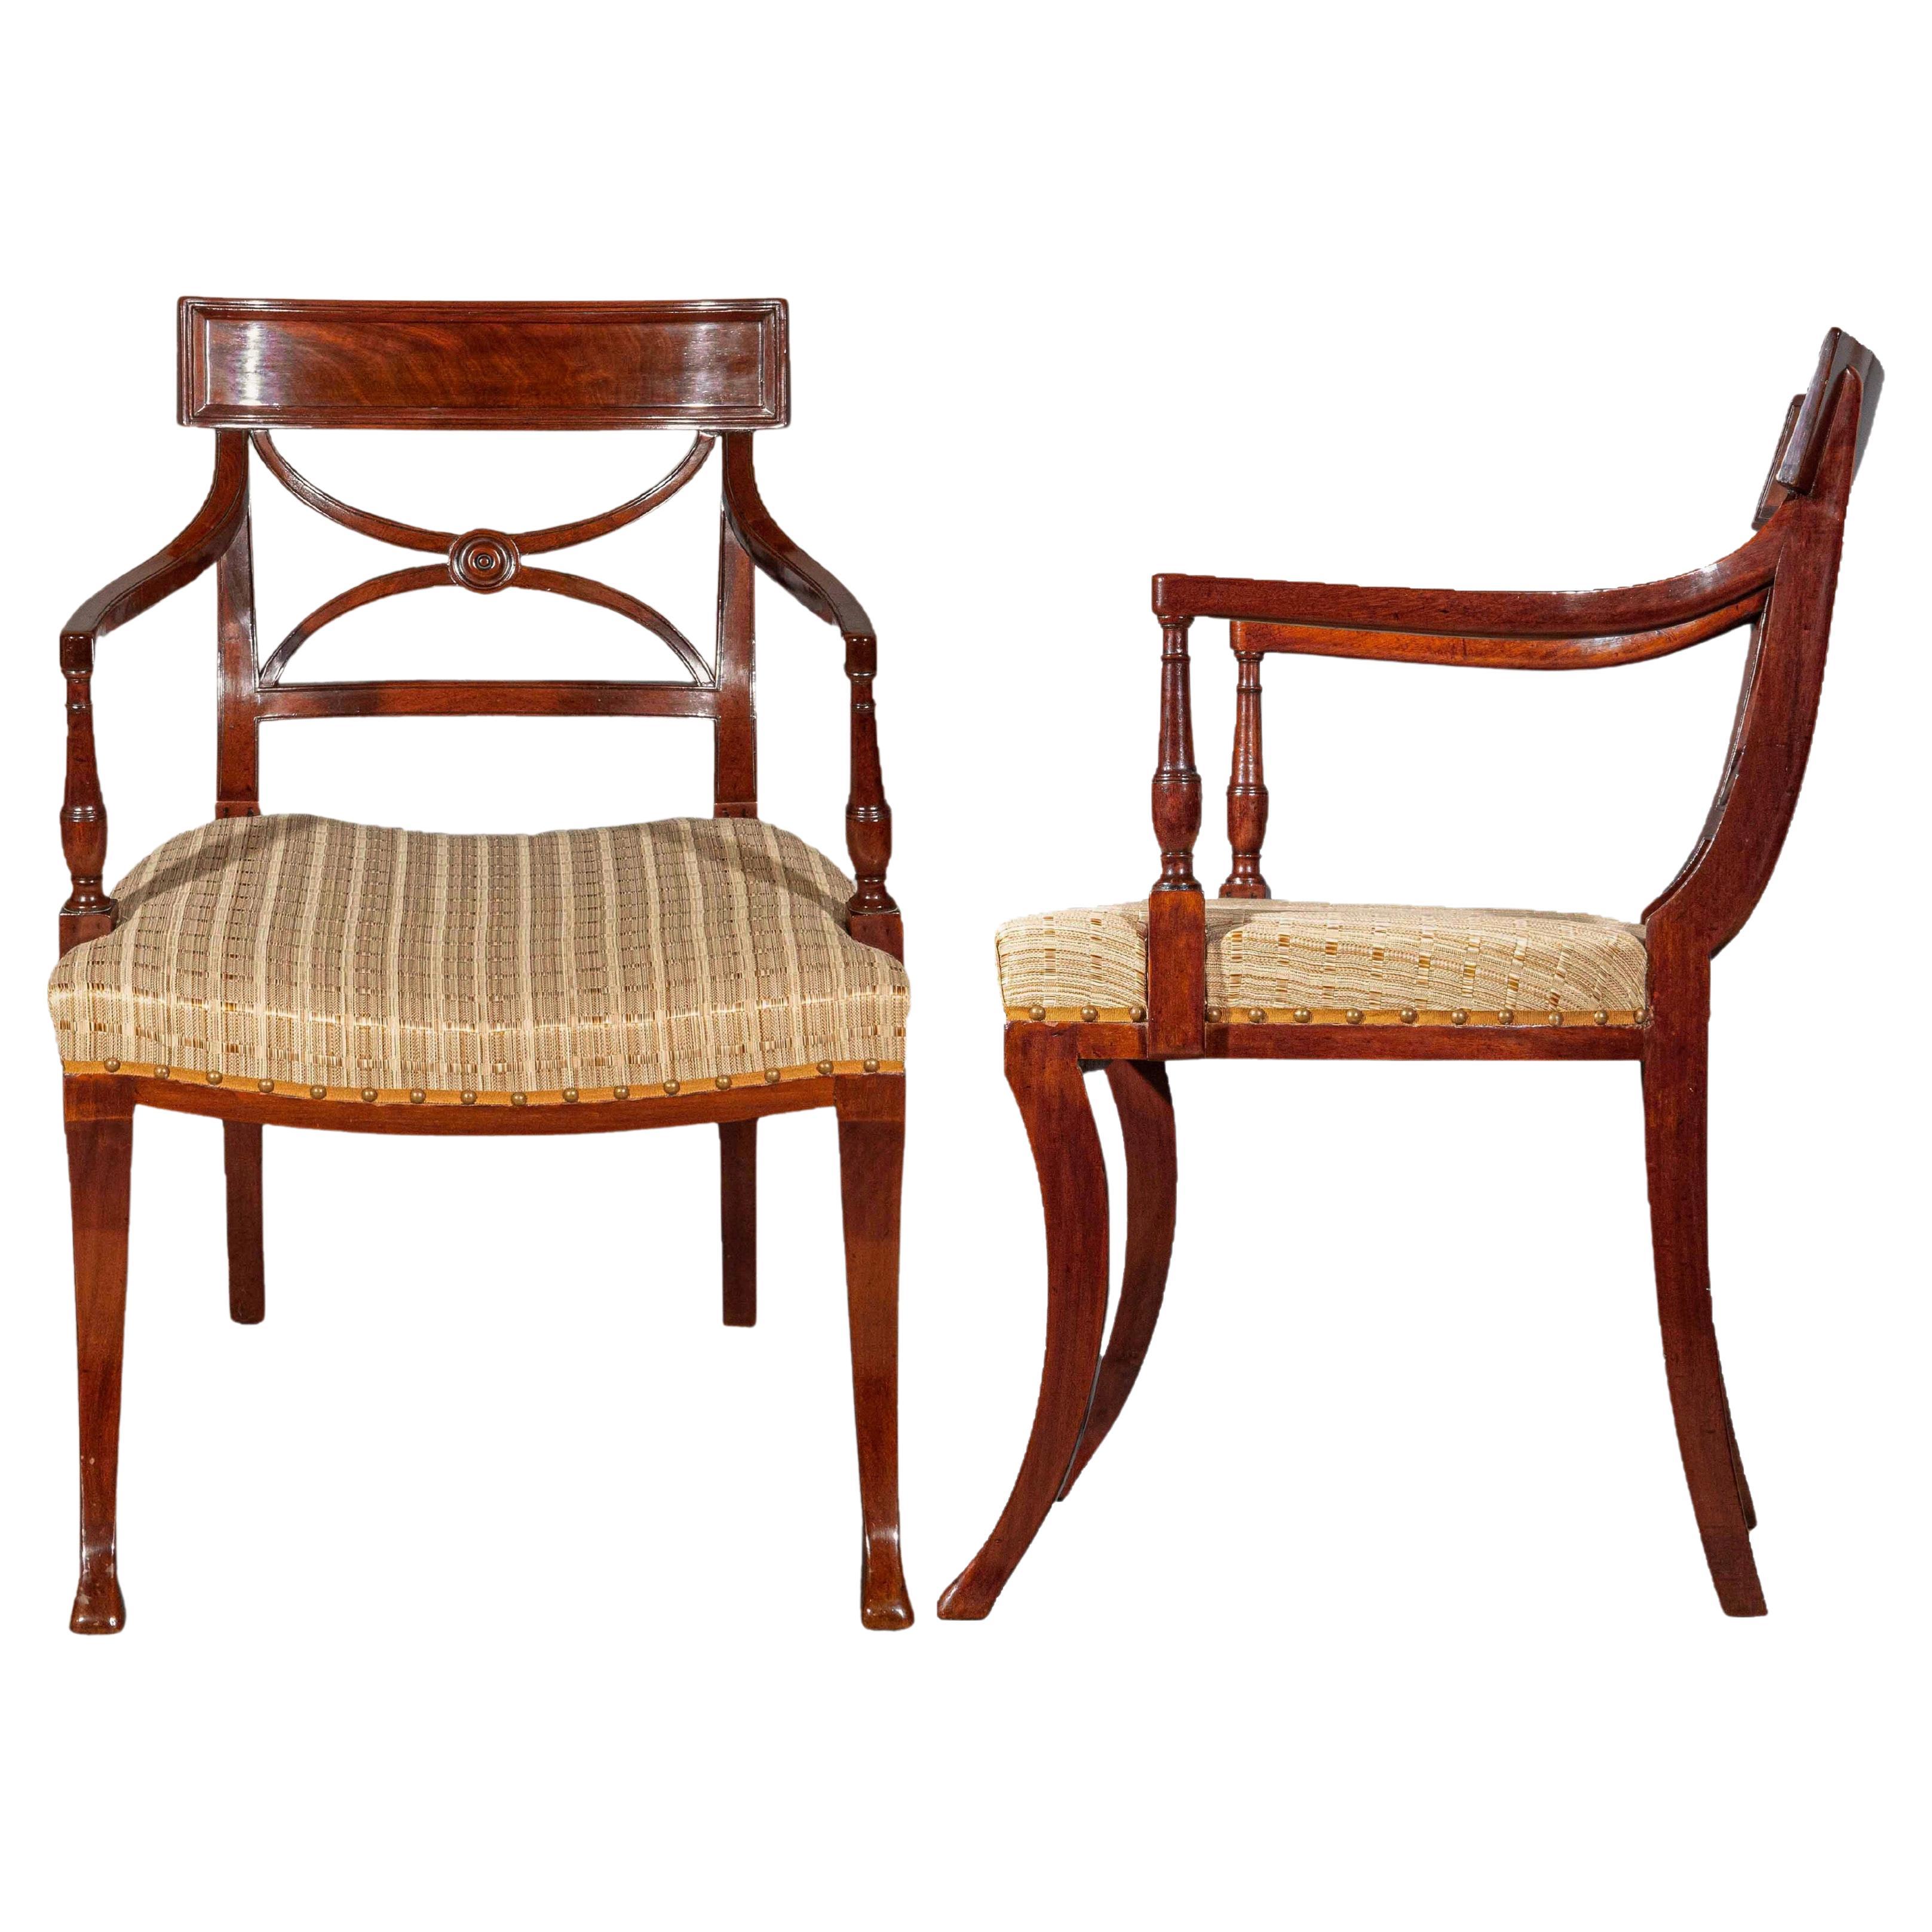 Pair of Regency Klismos Chairs, attributed to Gillows, Early 19th Century